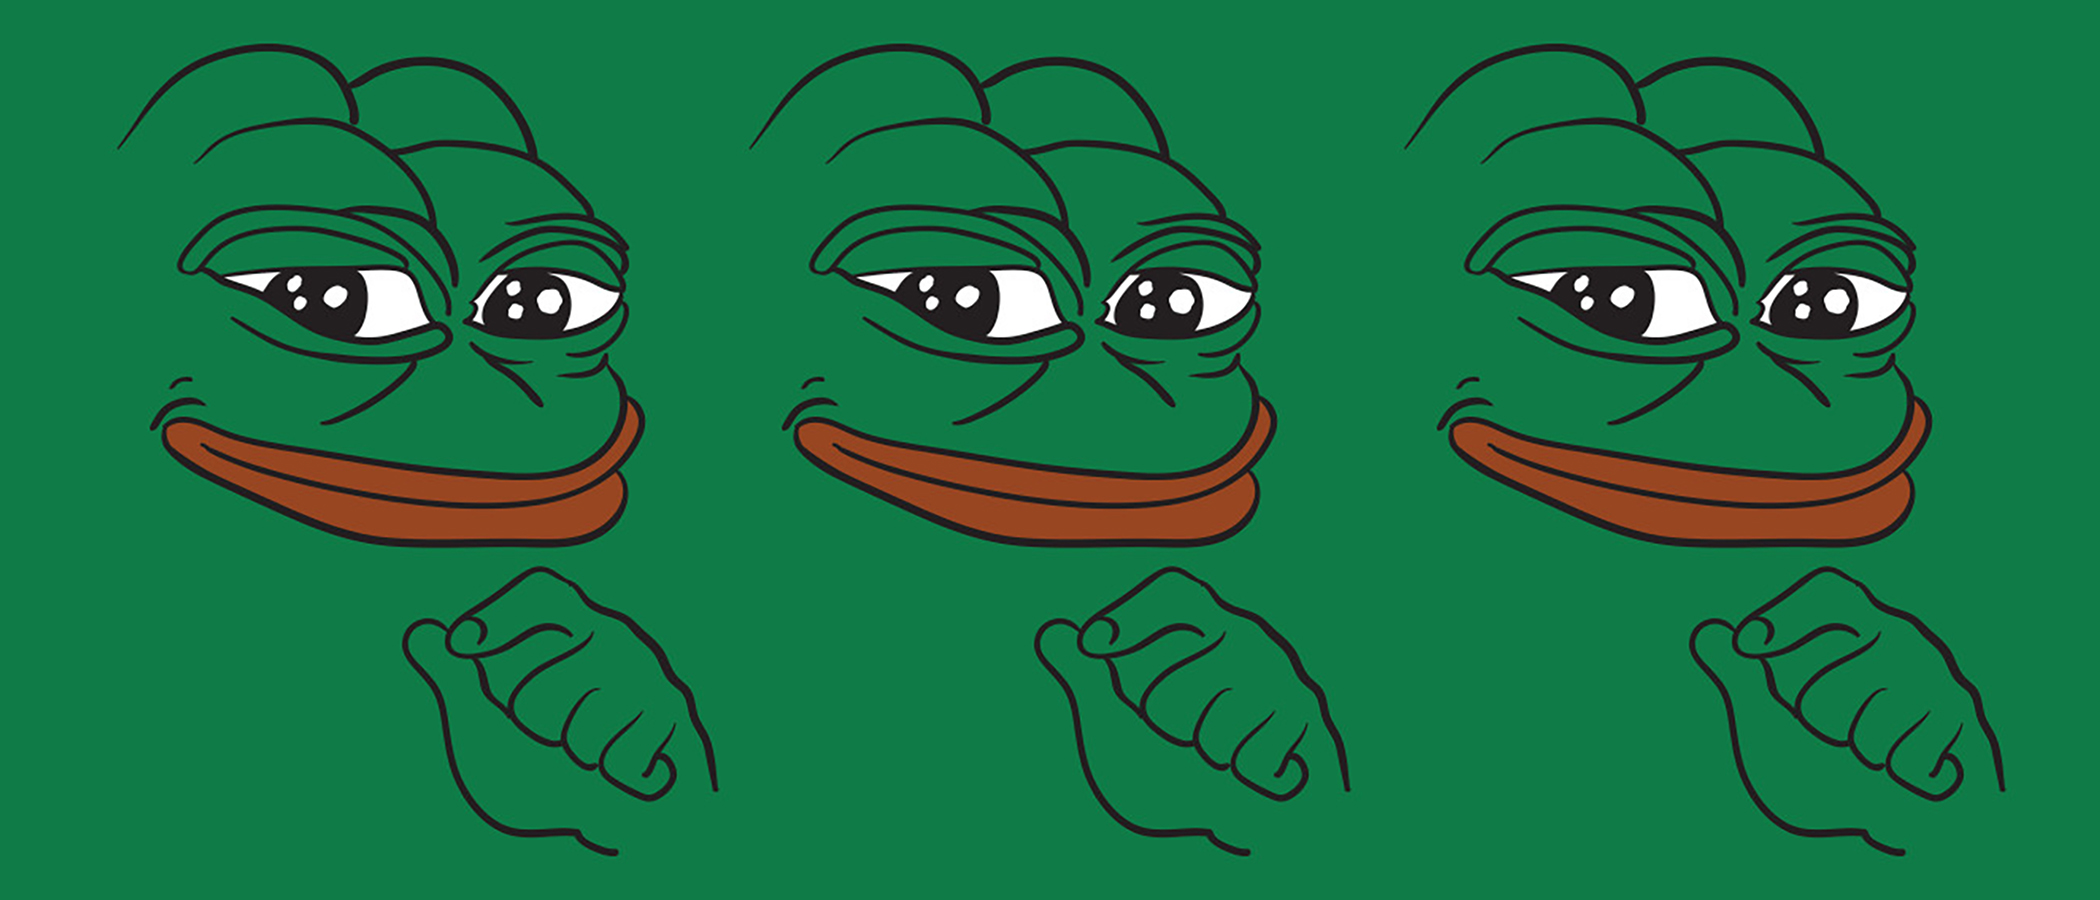 A History Of Pepe The Frog, In 10 Minutes.